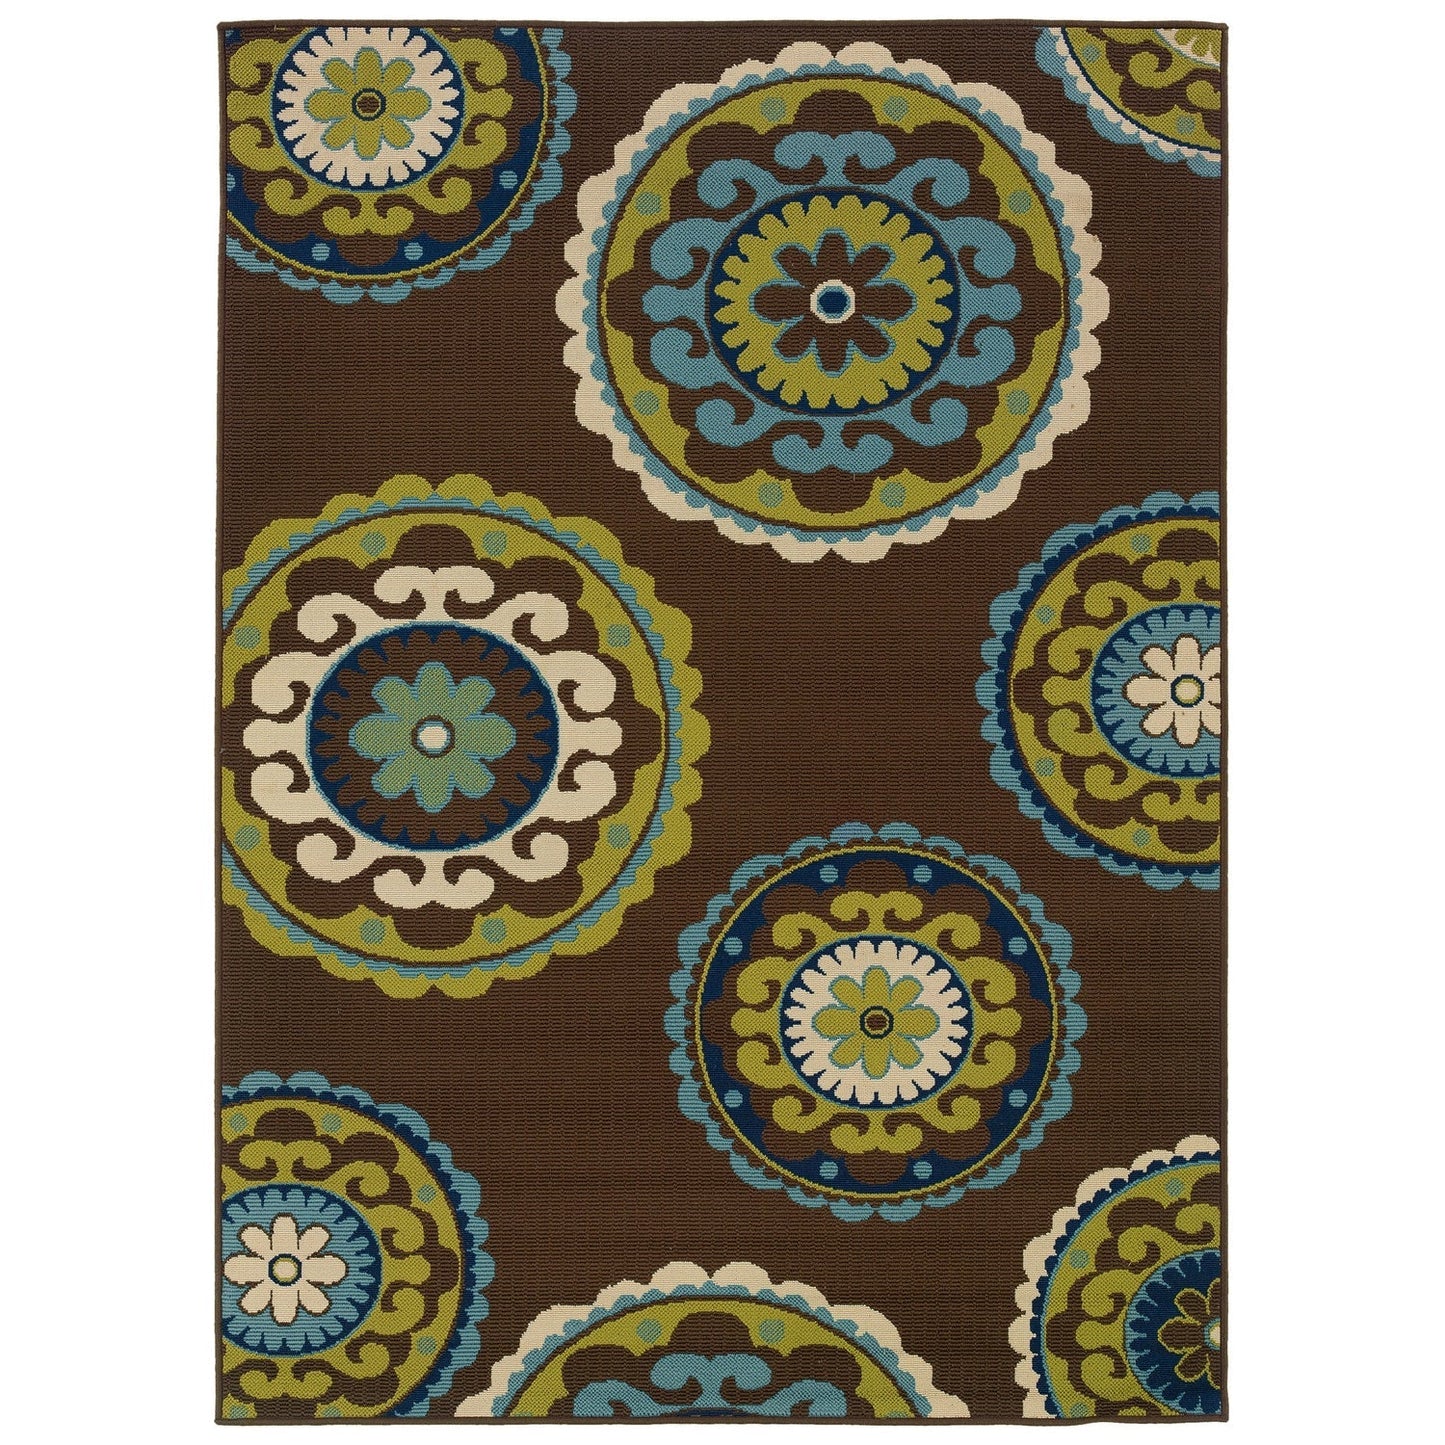 Accents > Rugs - 7'10 X 10'10 Outdoor/Indoor Area Rug In Brown Teal, Green Yellow Circles